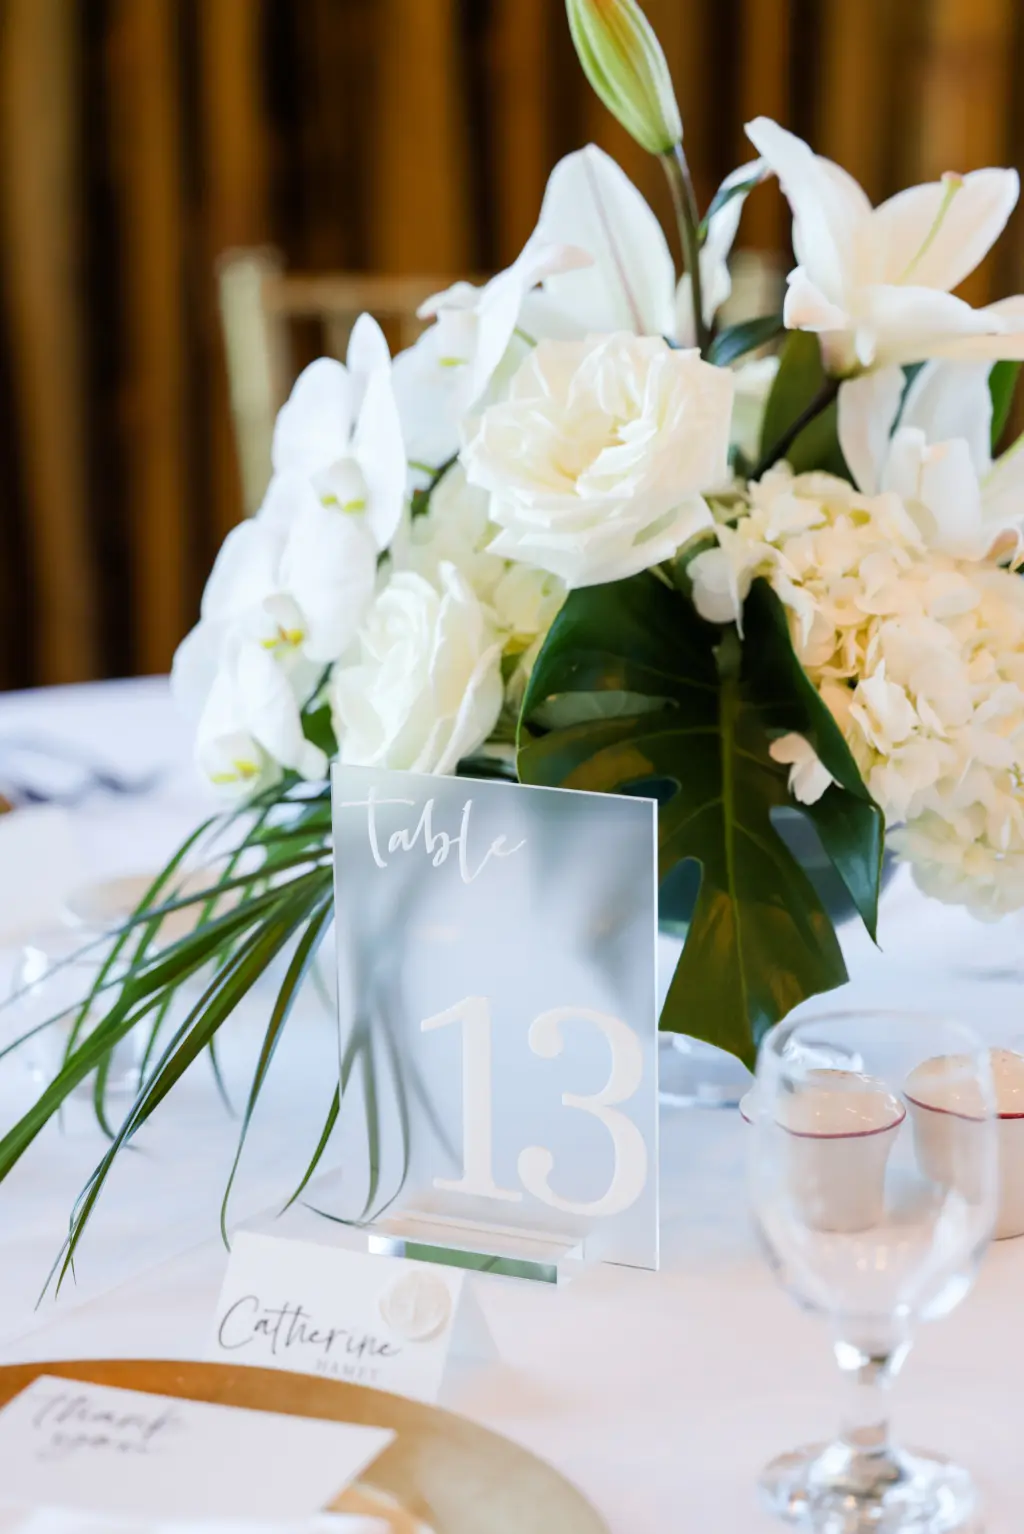 Frosted Acrylic Table Numbers for Wedding Reception | Tropical Palm Leaf, Garden Rose, Orchids, and Hydrangeas Centerpiece Ideas